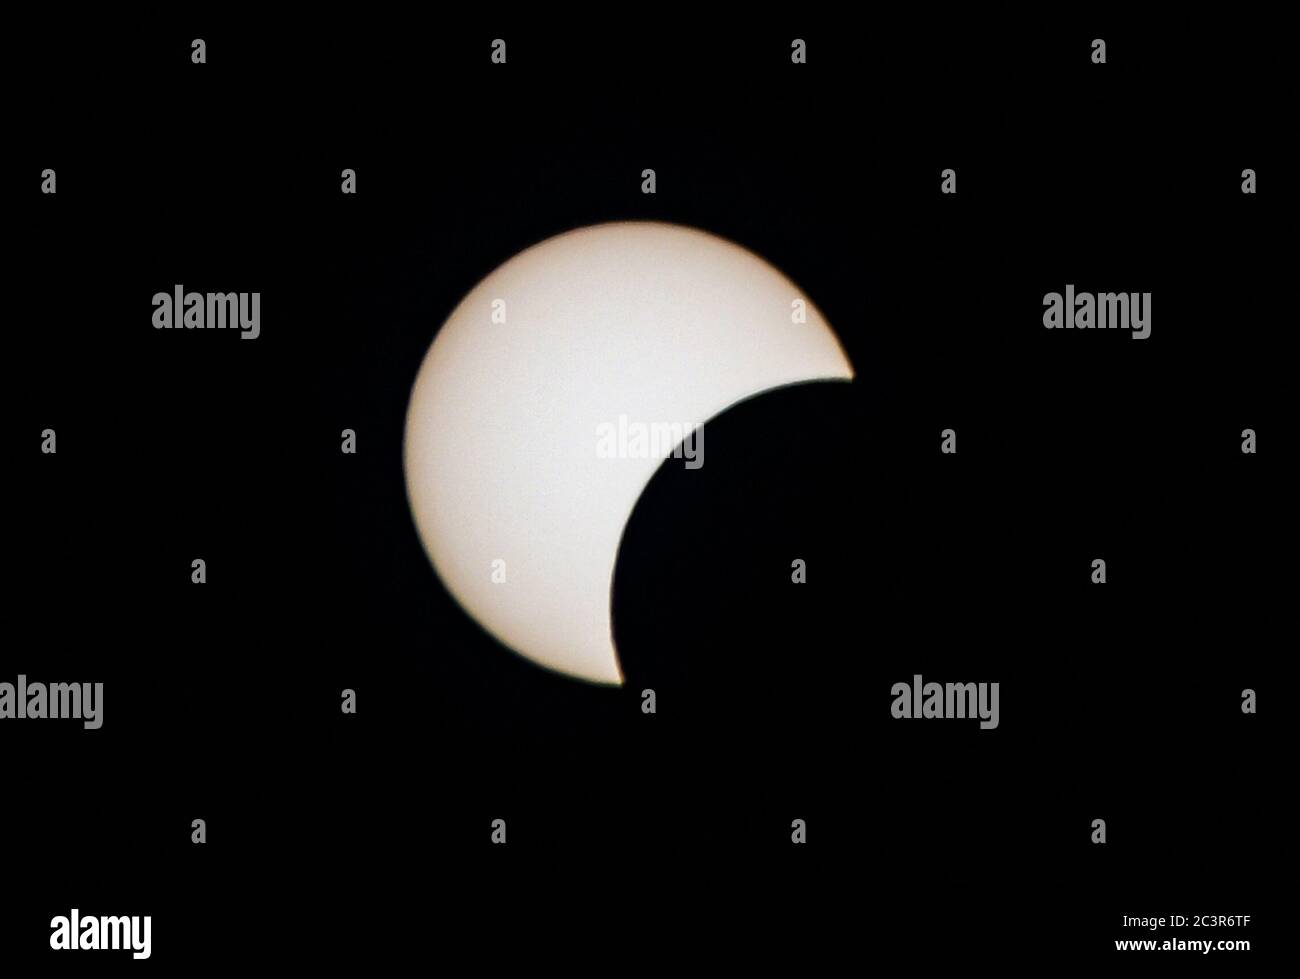 Damascus, Syria. 21st June, 2020. A solar eclipse is seen in the sky over Damascus, Syria, on June 21, 2020. An annular solar eclipse occurred on Sunday. Credit: Ammar Safarjalani/Xinhua/Alamy Live News Stock Photo